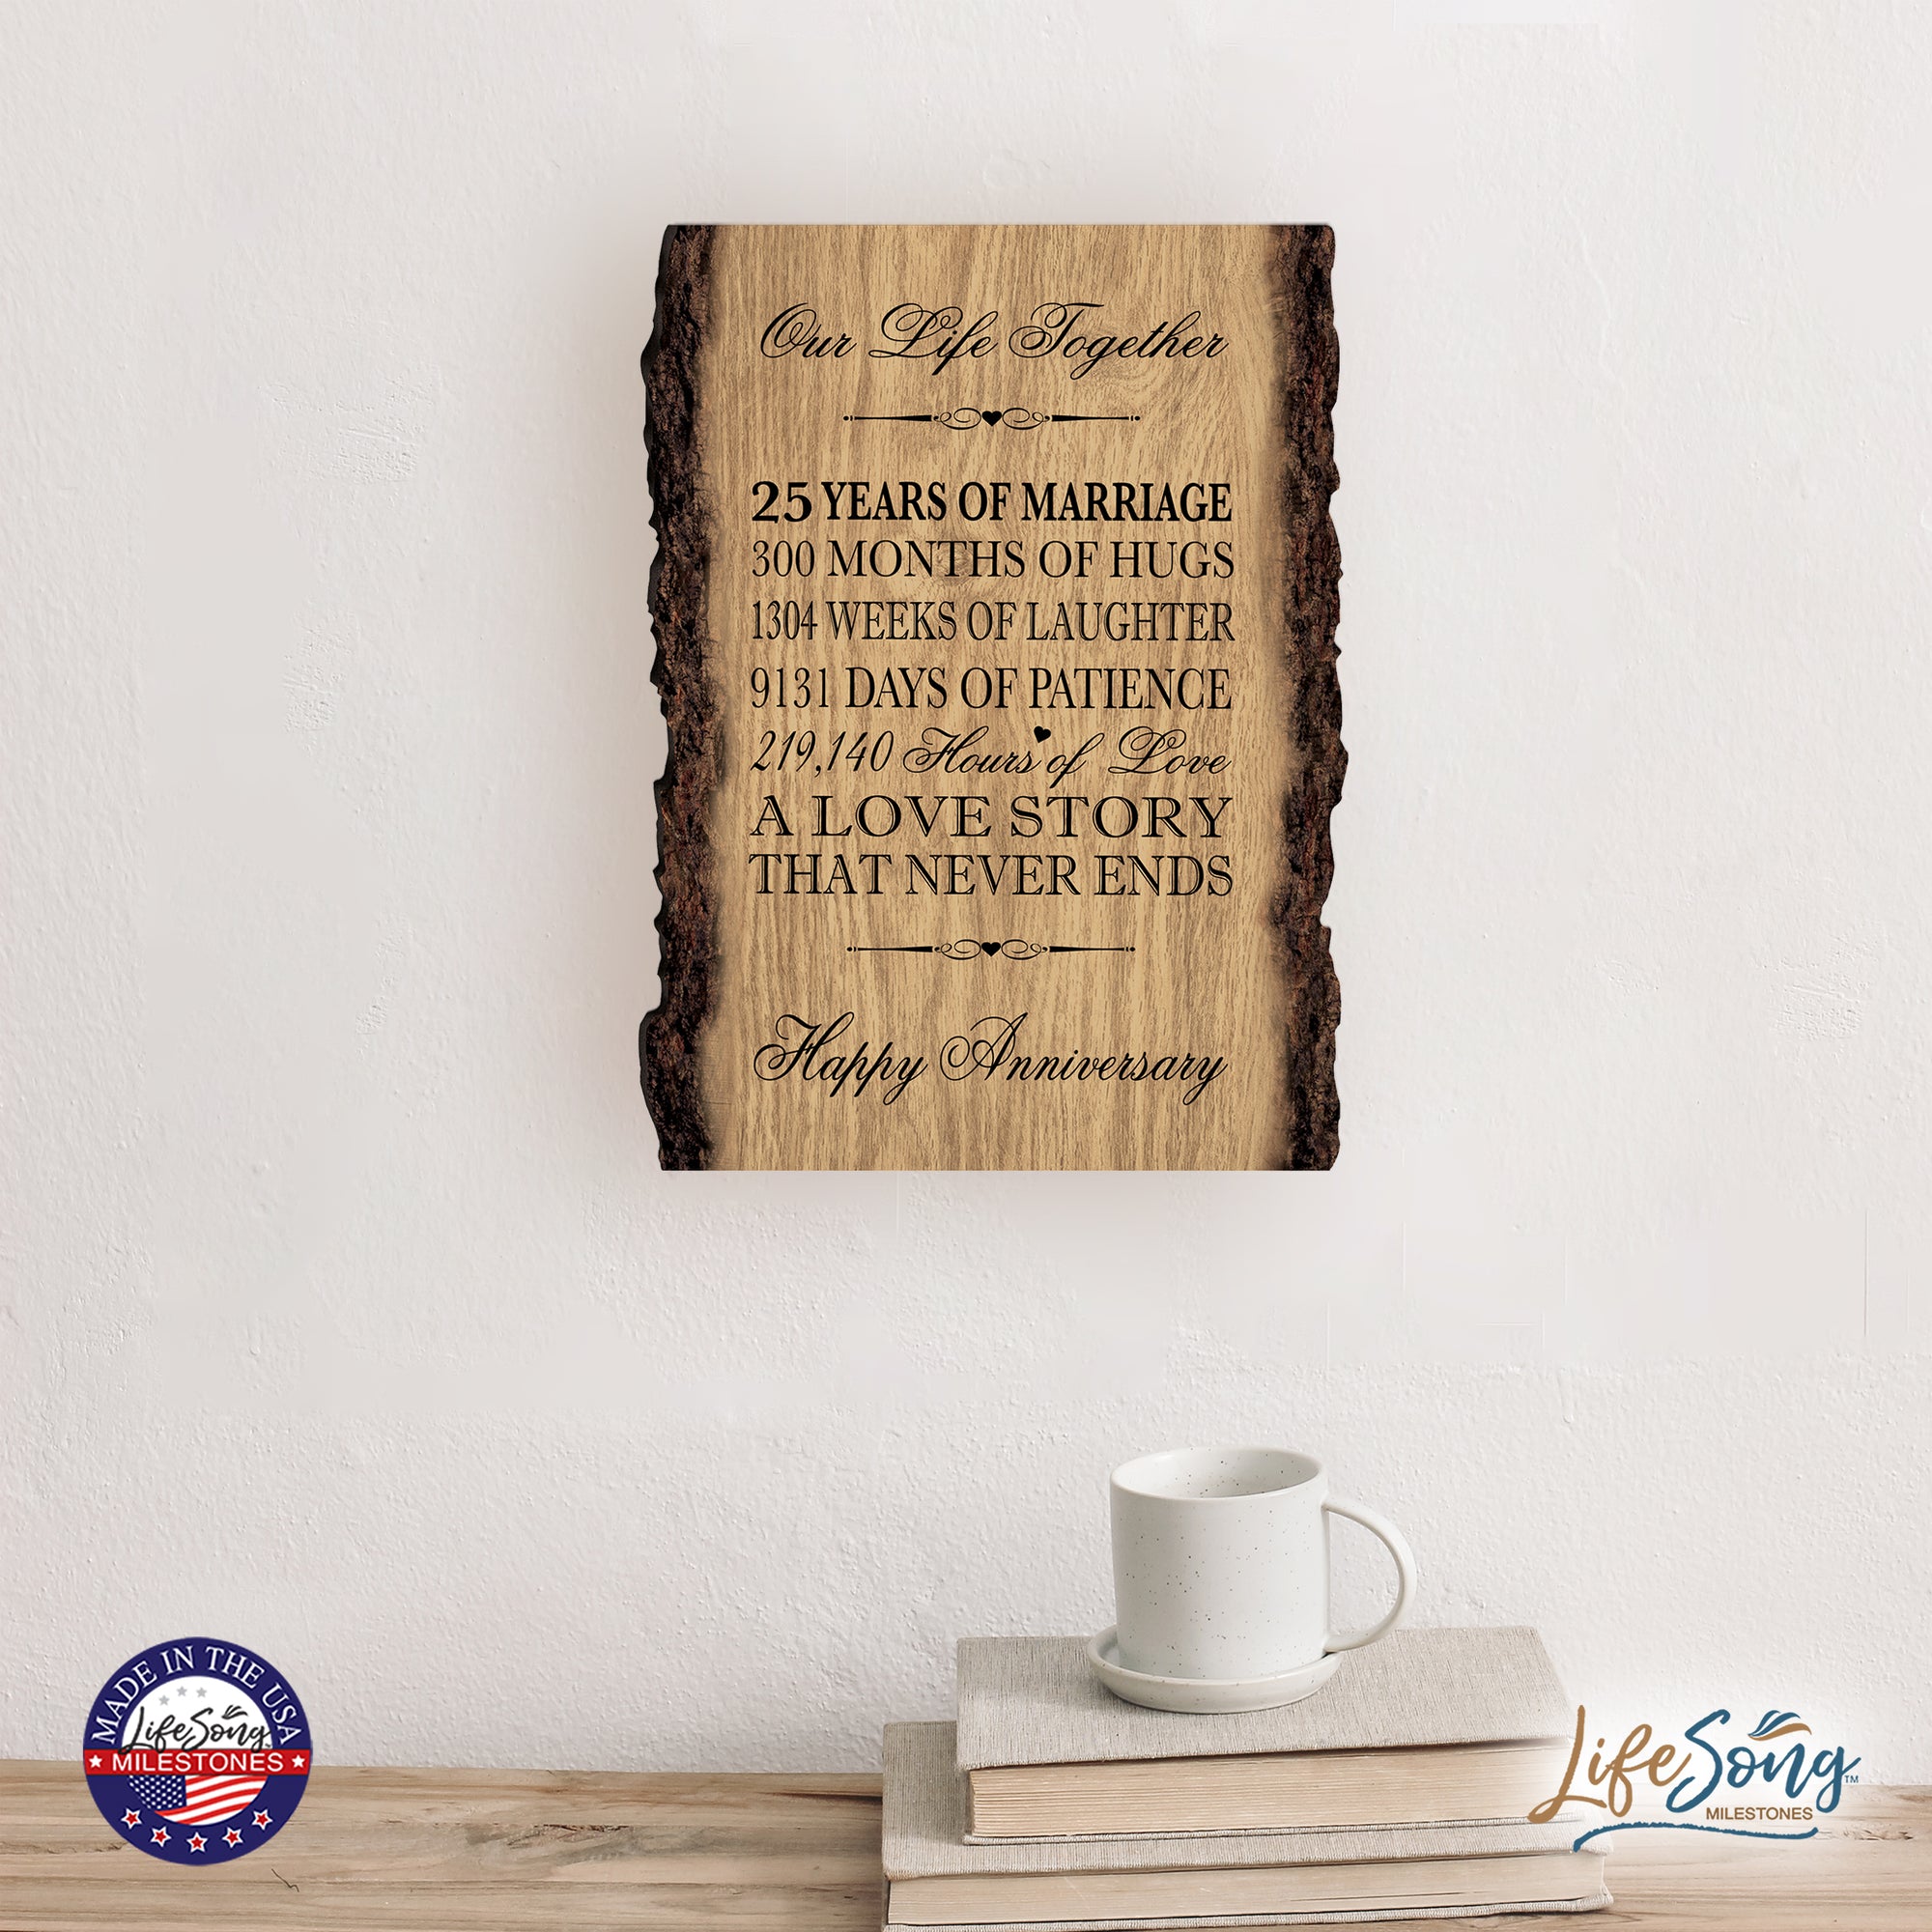 Rustic Wedding Anniversary 9x12 Barky Wall Plaque Gift For Parents, Grandparents New Couple - 25 Years Of Marriage